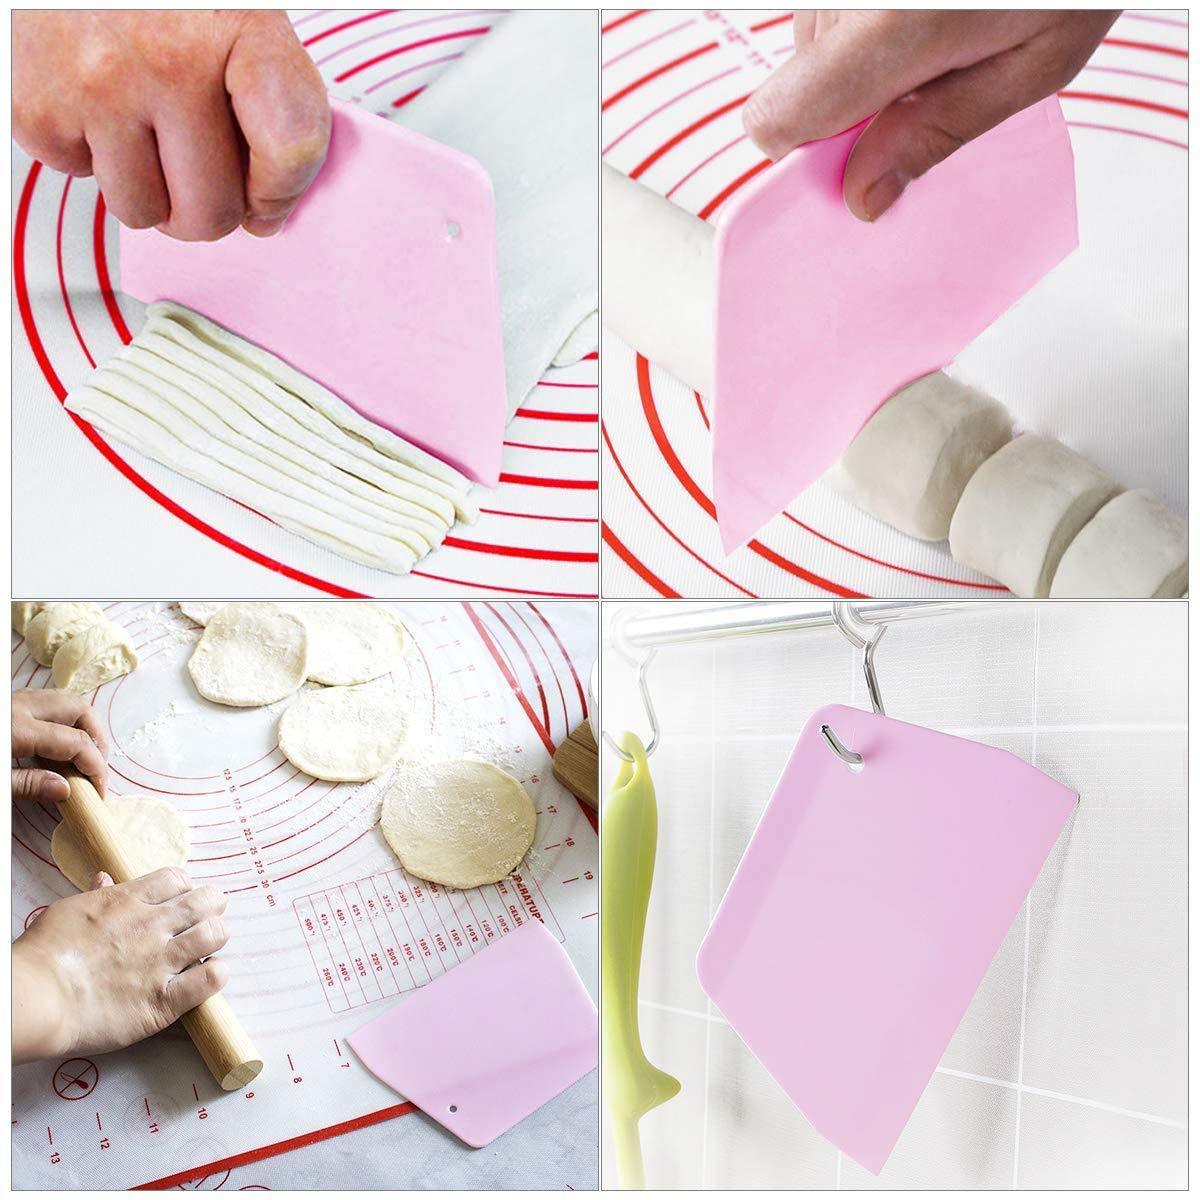 Silicone Pastry Mat Extra Large, 32" x 24" Non-stick Baking Mat with Measurement Kneading Board for Dough Rolling, Non-slip Counter Mat, Oven Liner, Fondant/Pie Crust Mat - CookCave